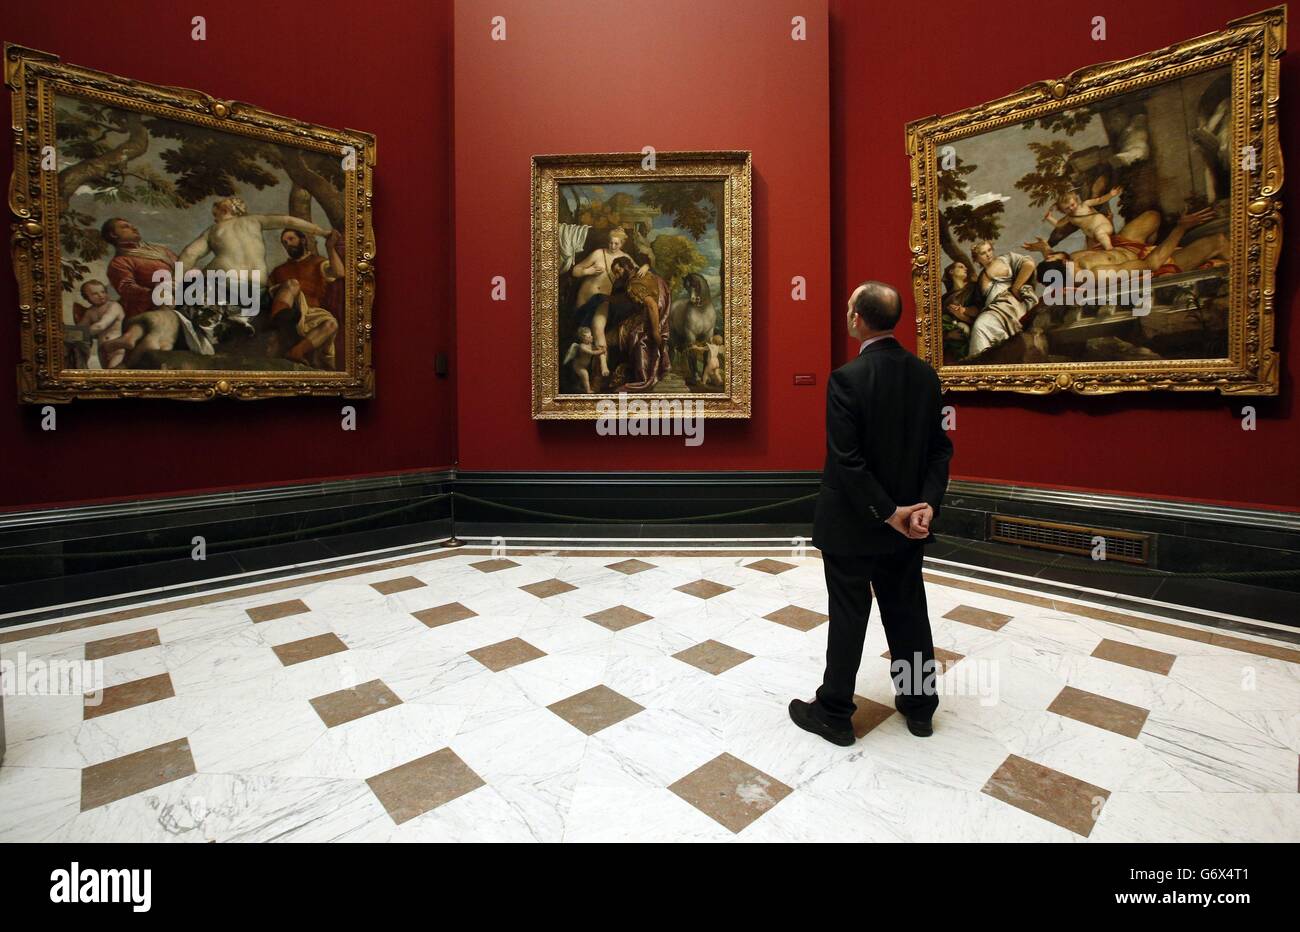 A visitor looks at three works by Paolo Veronese (left to right) Unfaithfullness, Mars and Venus United by Love, and Scorn, during a press preview for the Veronese: Magnificence in Renaissance Venice exhibition at the National Gallery, London. Stock Photo